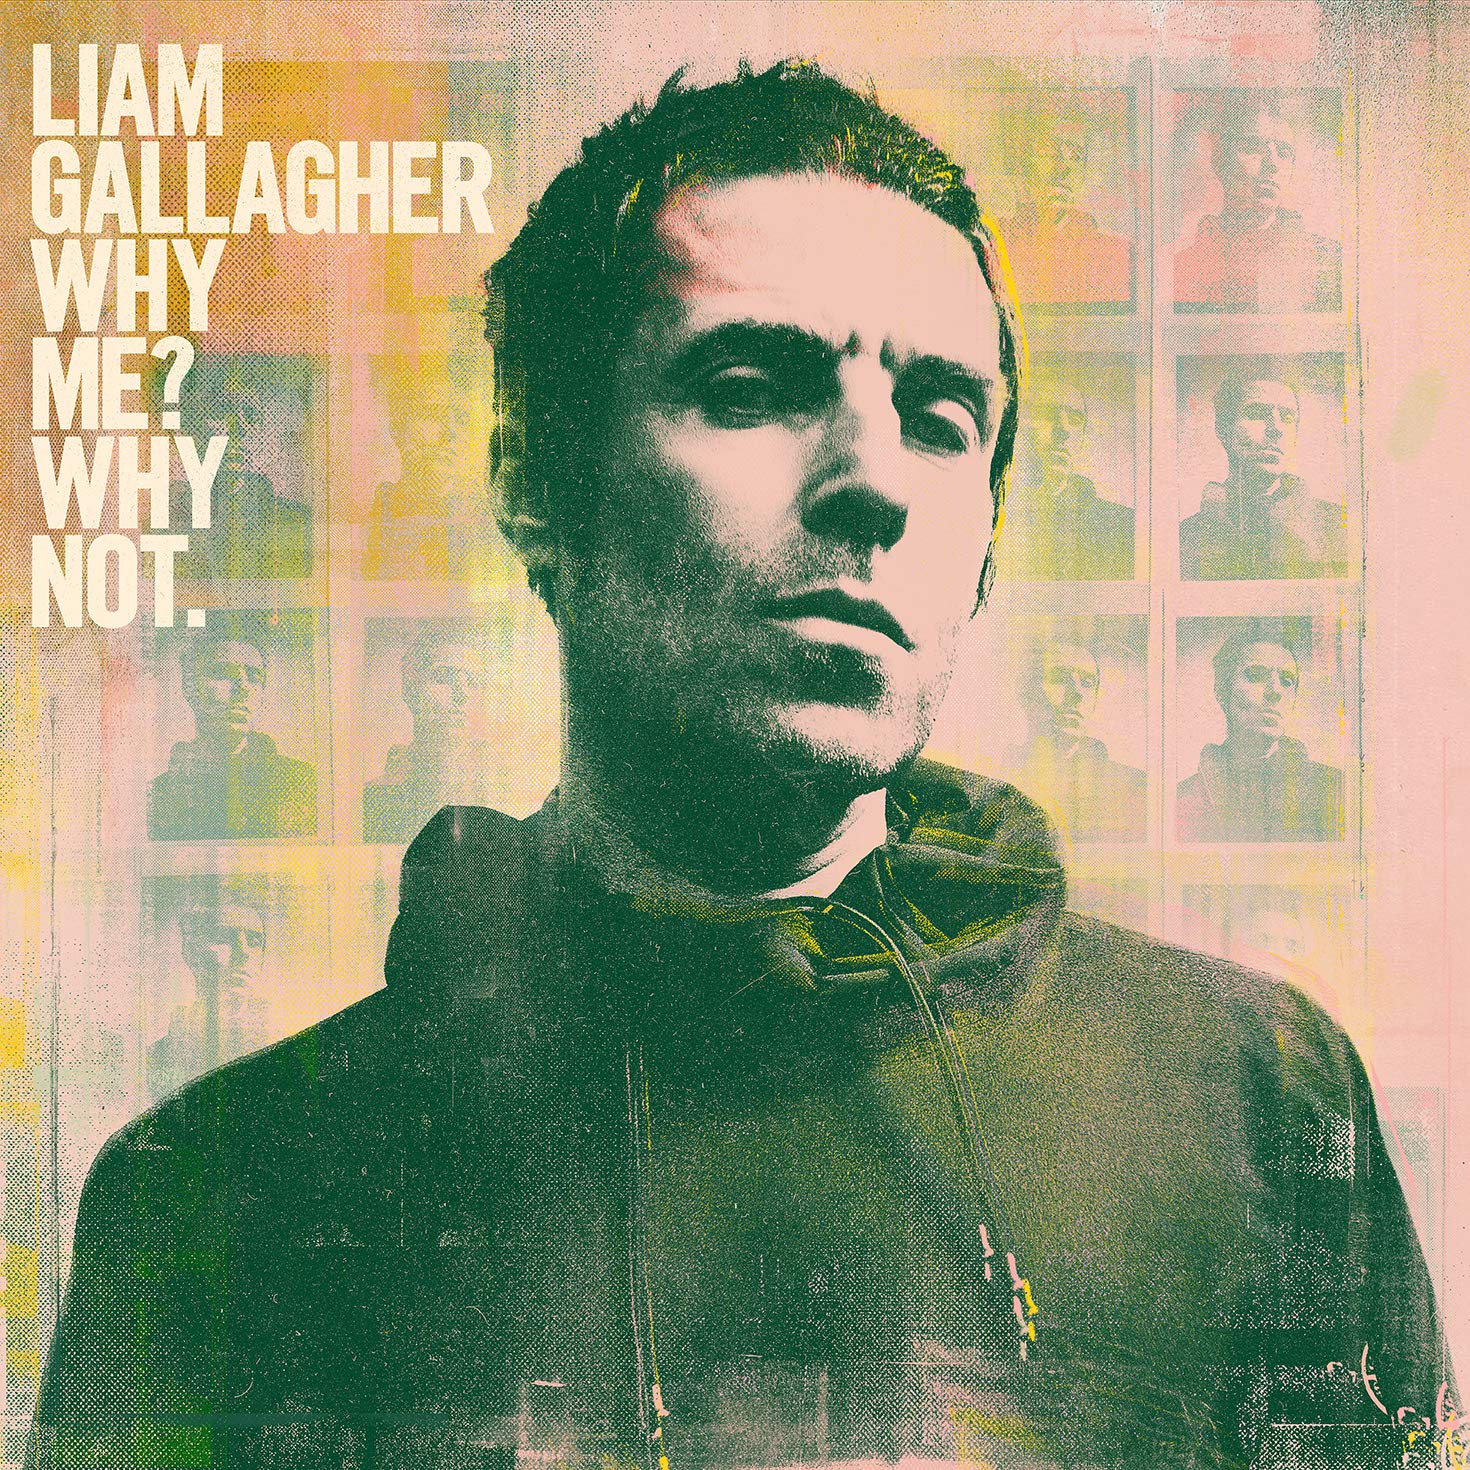 boom reviews - liam gallagher - why me why not